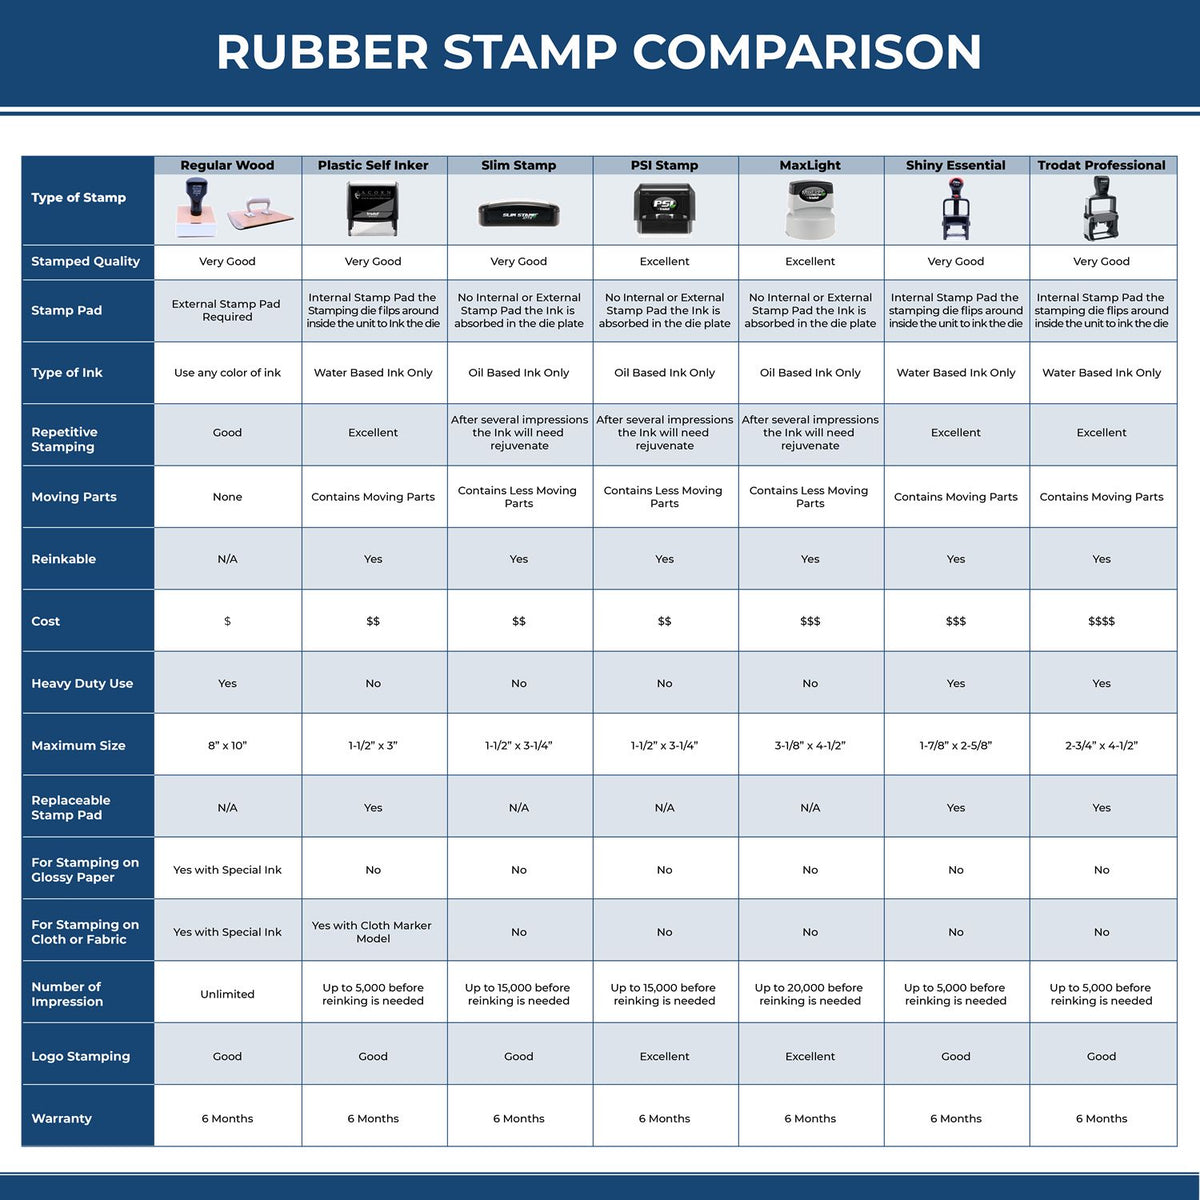 Large Self Inking Petitioner Stamp 4628S Rubber Stamp Comparison